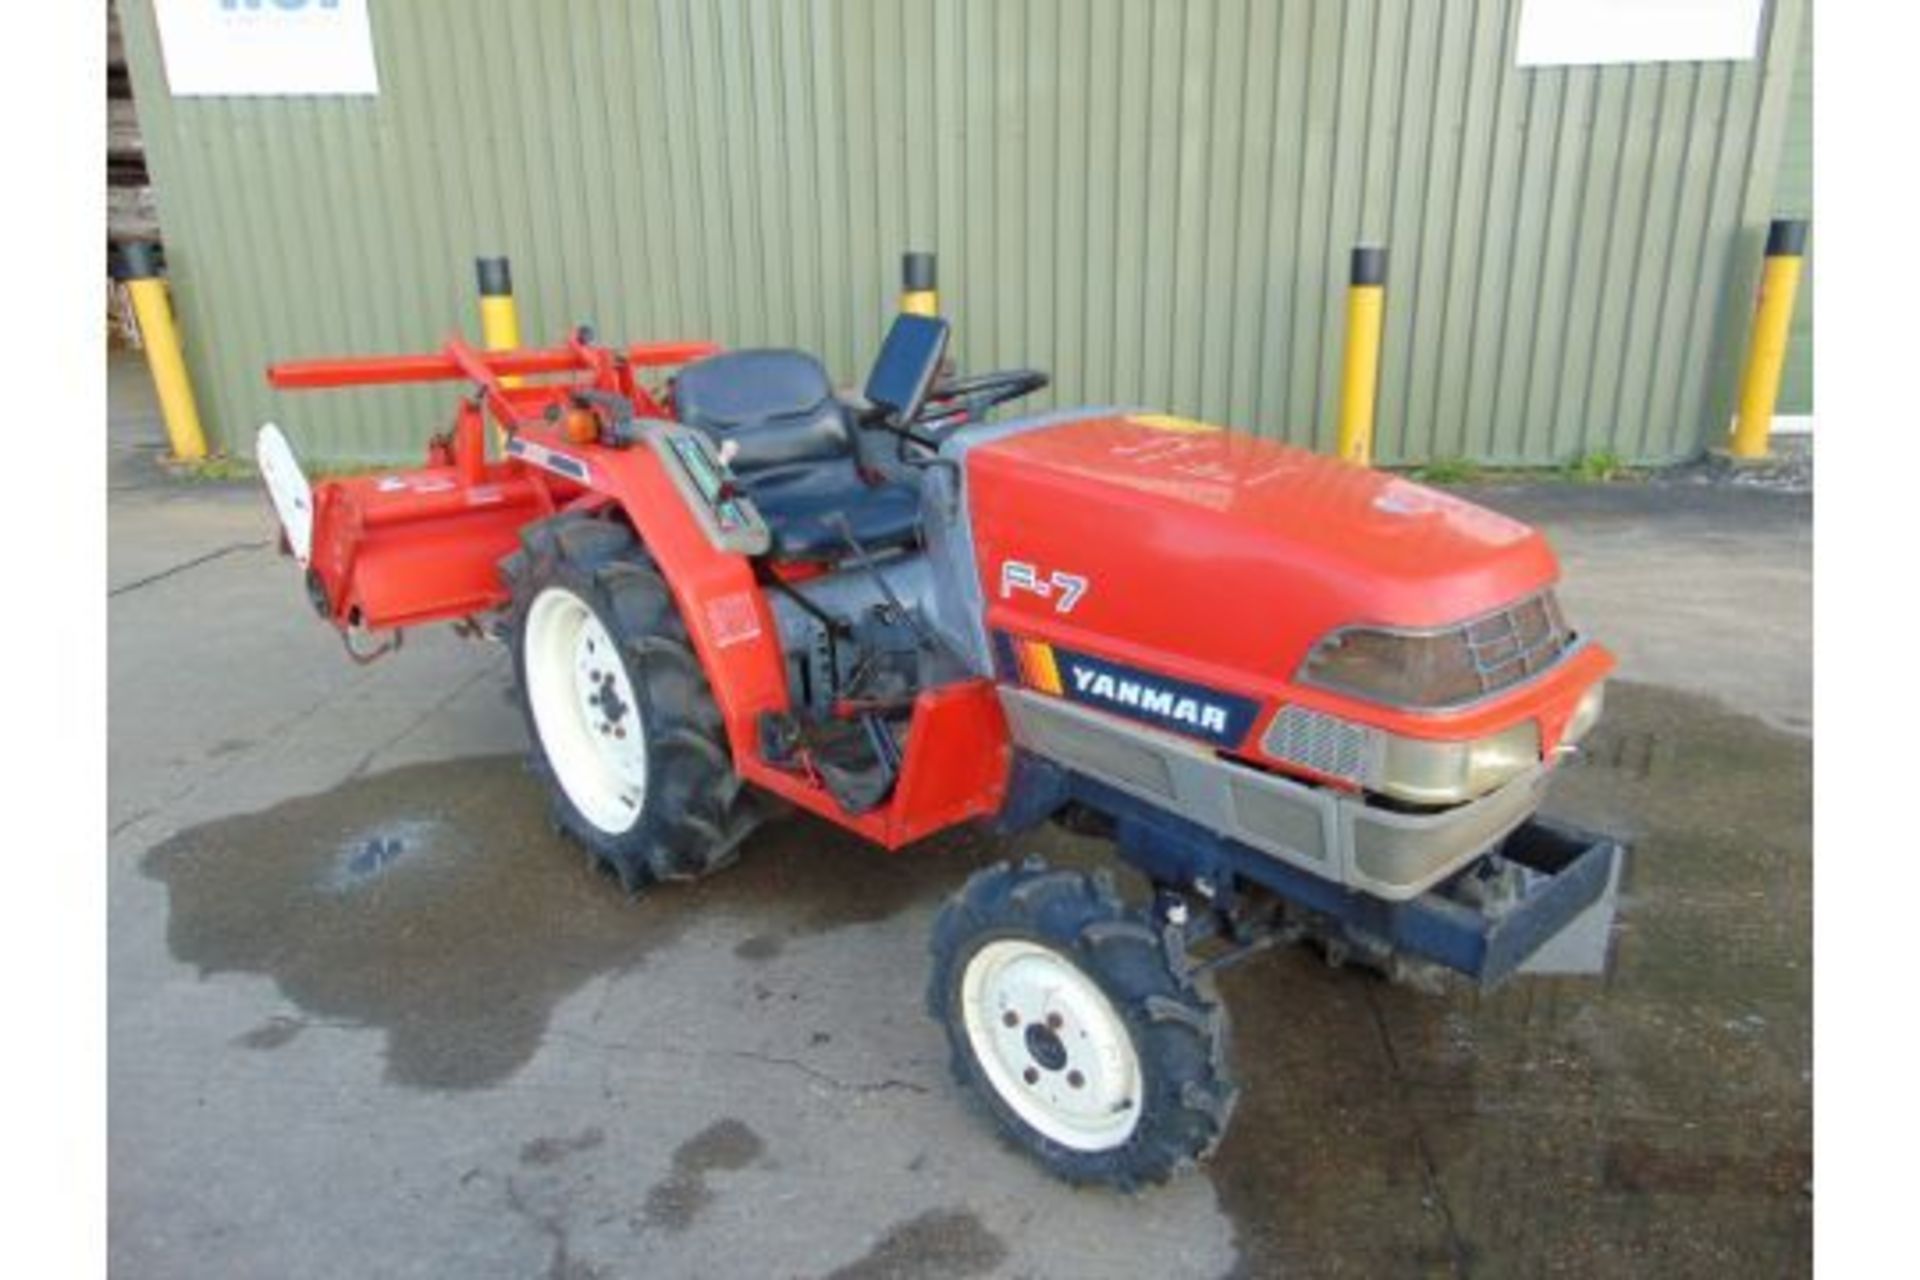 Yanmar F-7 4 x 4 Diesel Compact Tractor c/w RSA-1303 Rotorvator - Image 2 of 28